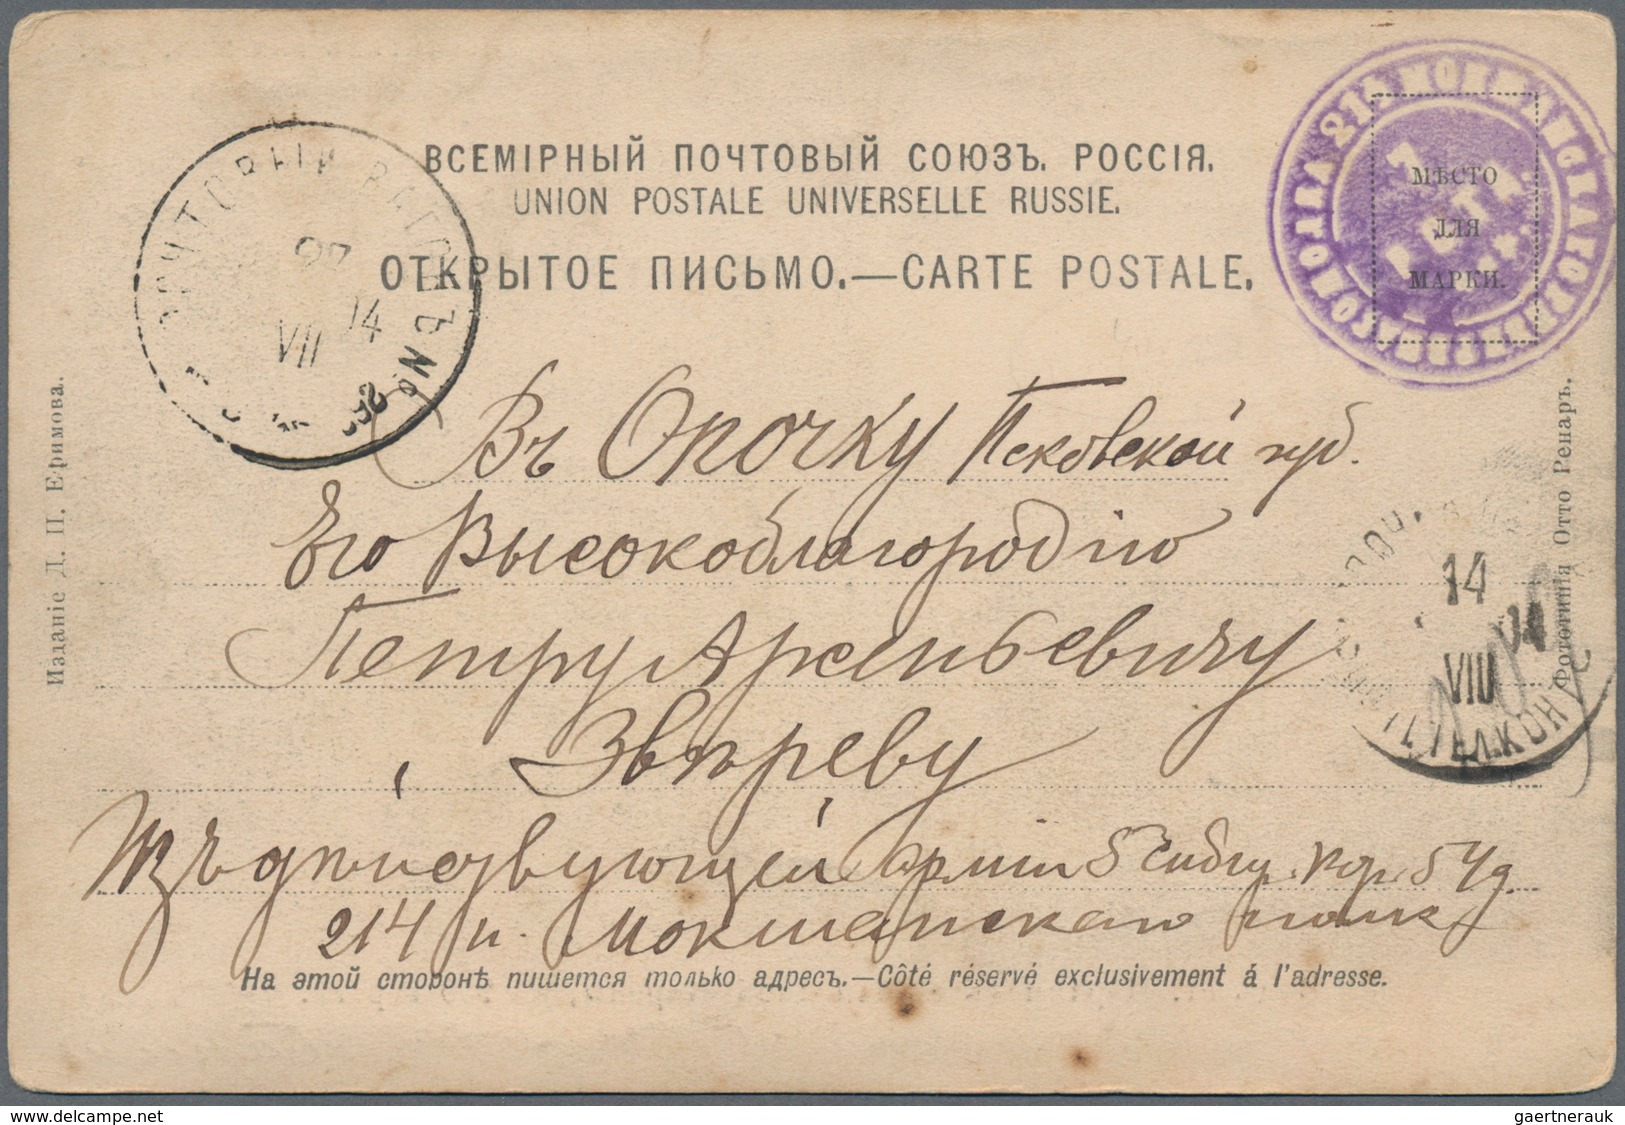 Russische Post In China: 1904, Russo-Japanese War Occupation Of Manchuria, View Card Of The Railway - China